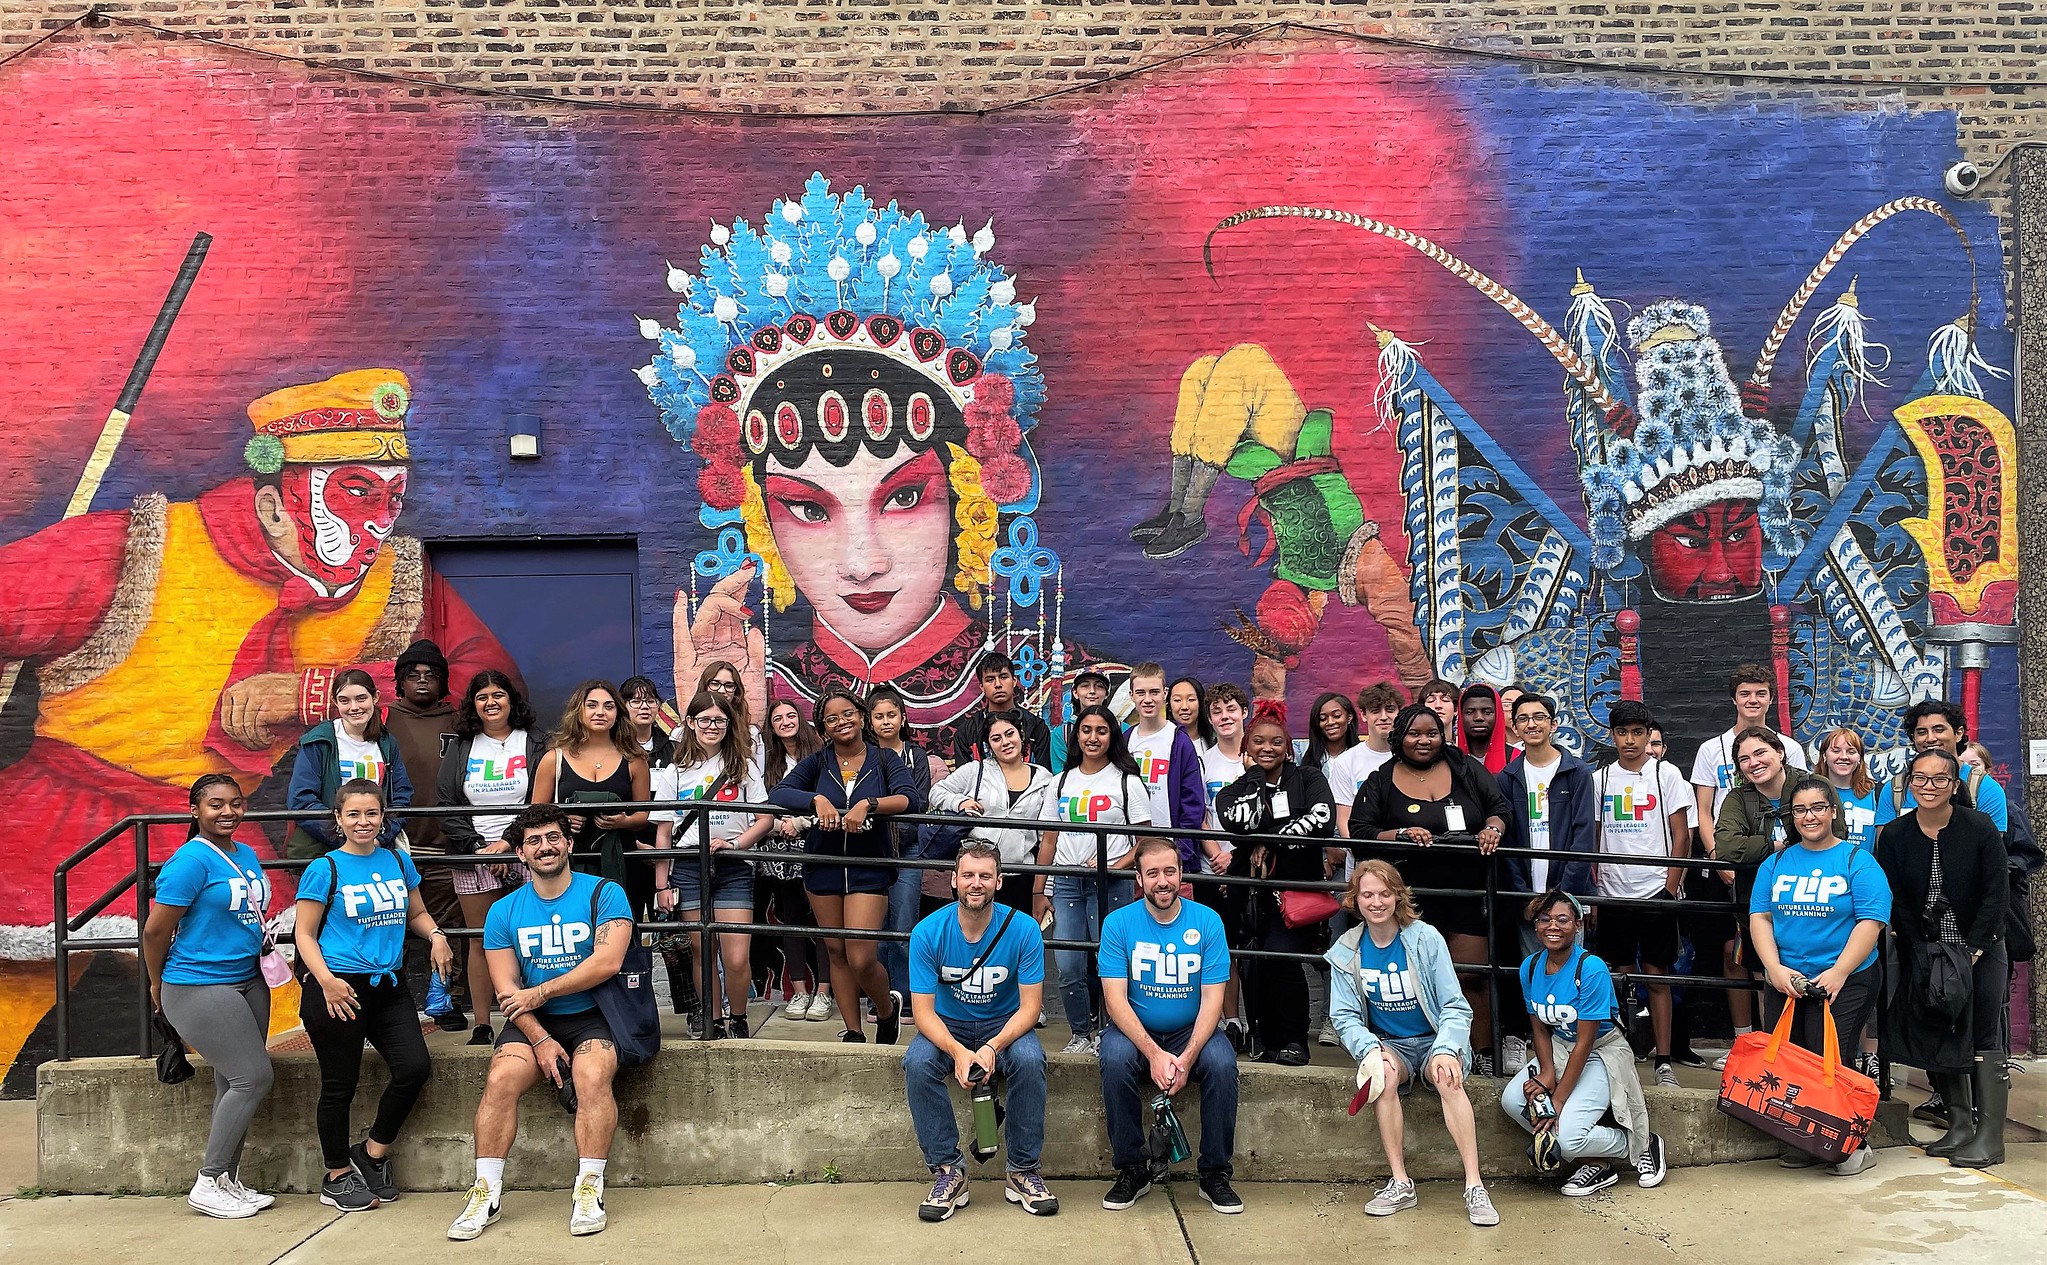 photo of a large group of FLIP students in front of a Chinatown mural with large colorful images from Chinese culture and history